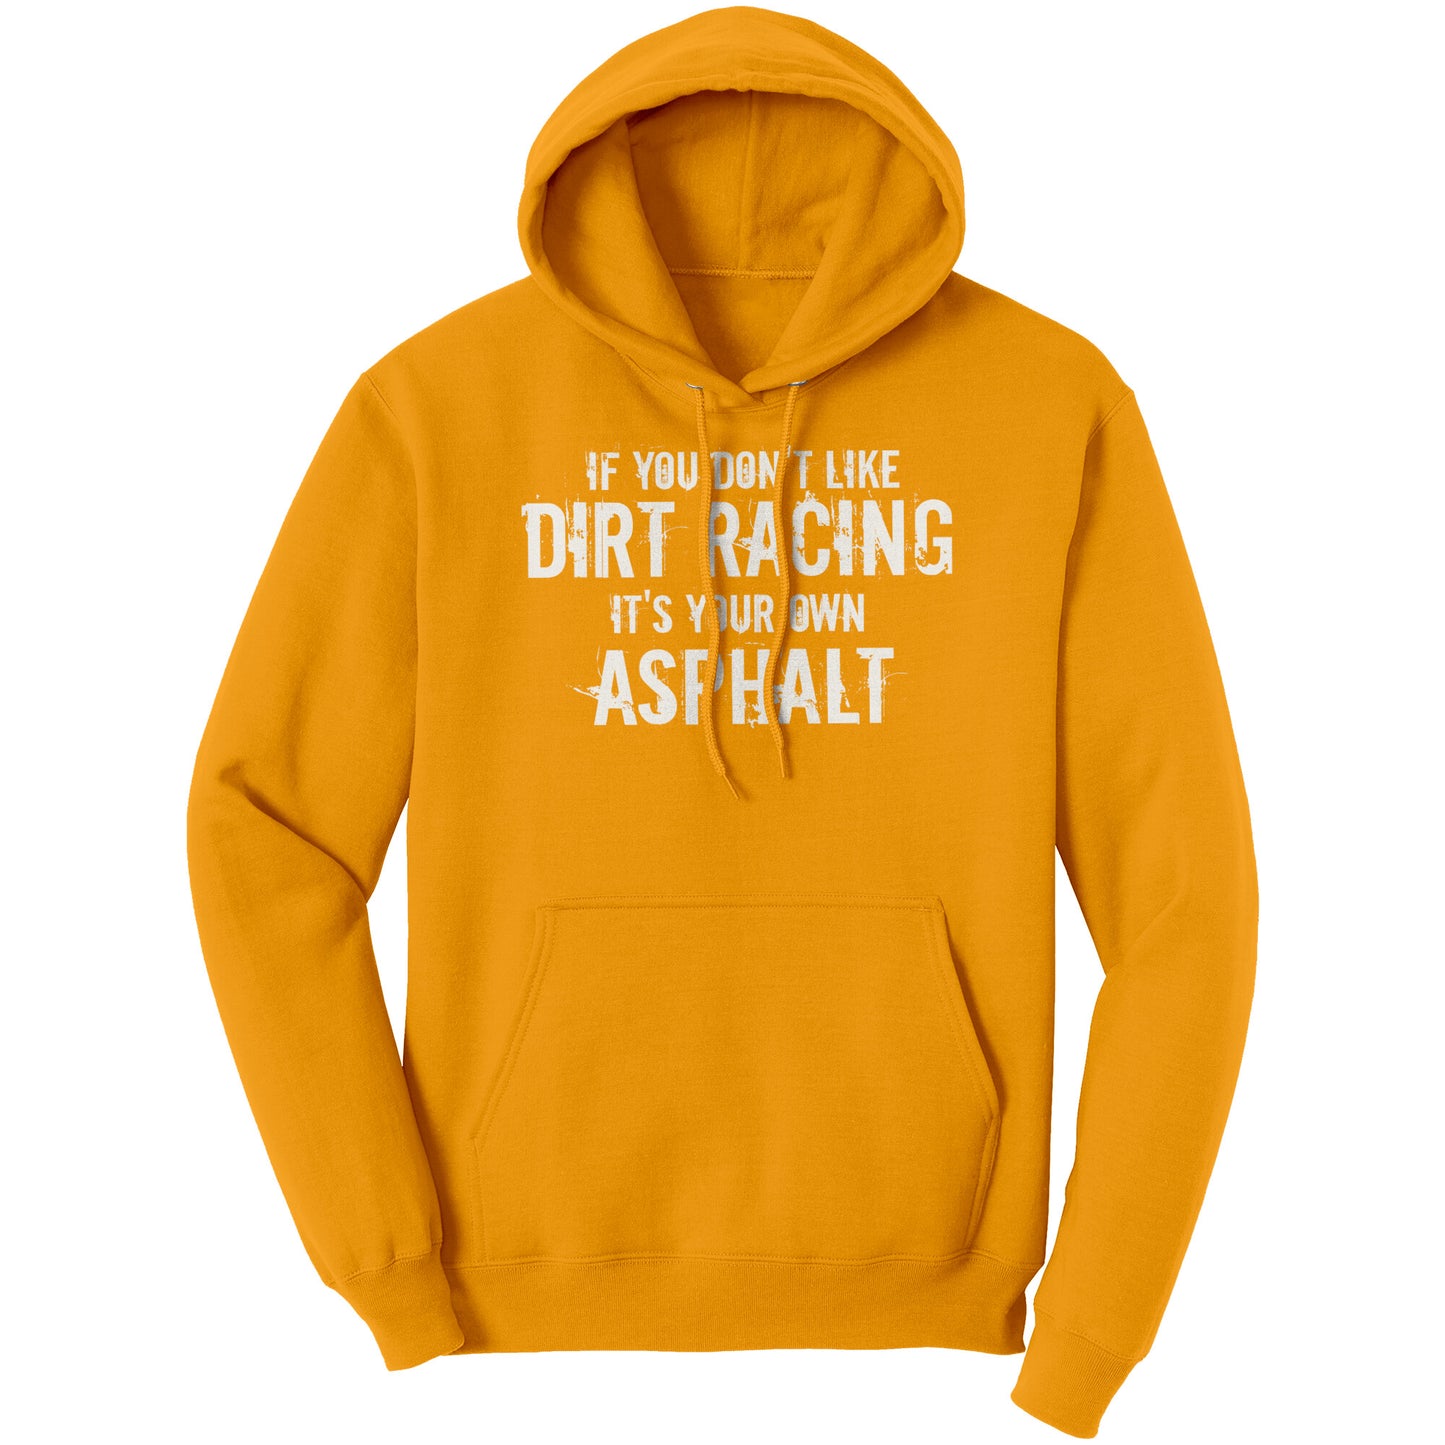 If You Don't Like Dirt Racing It's Your Own Asphalt Hoodie